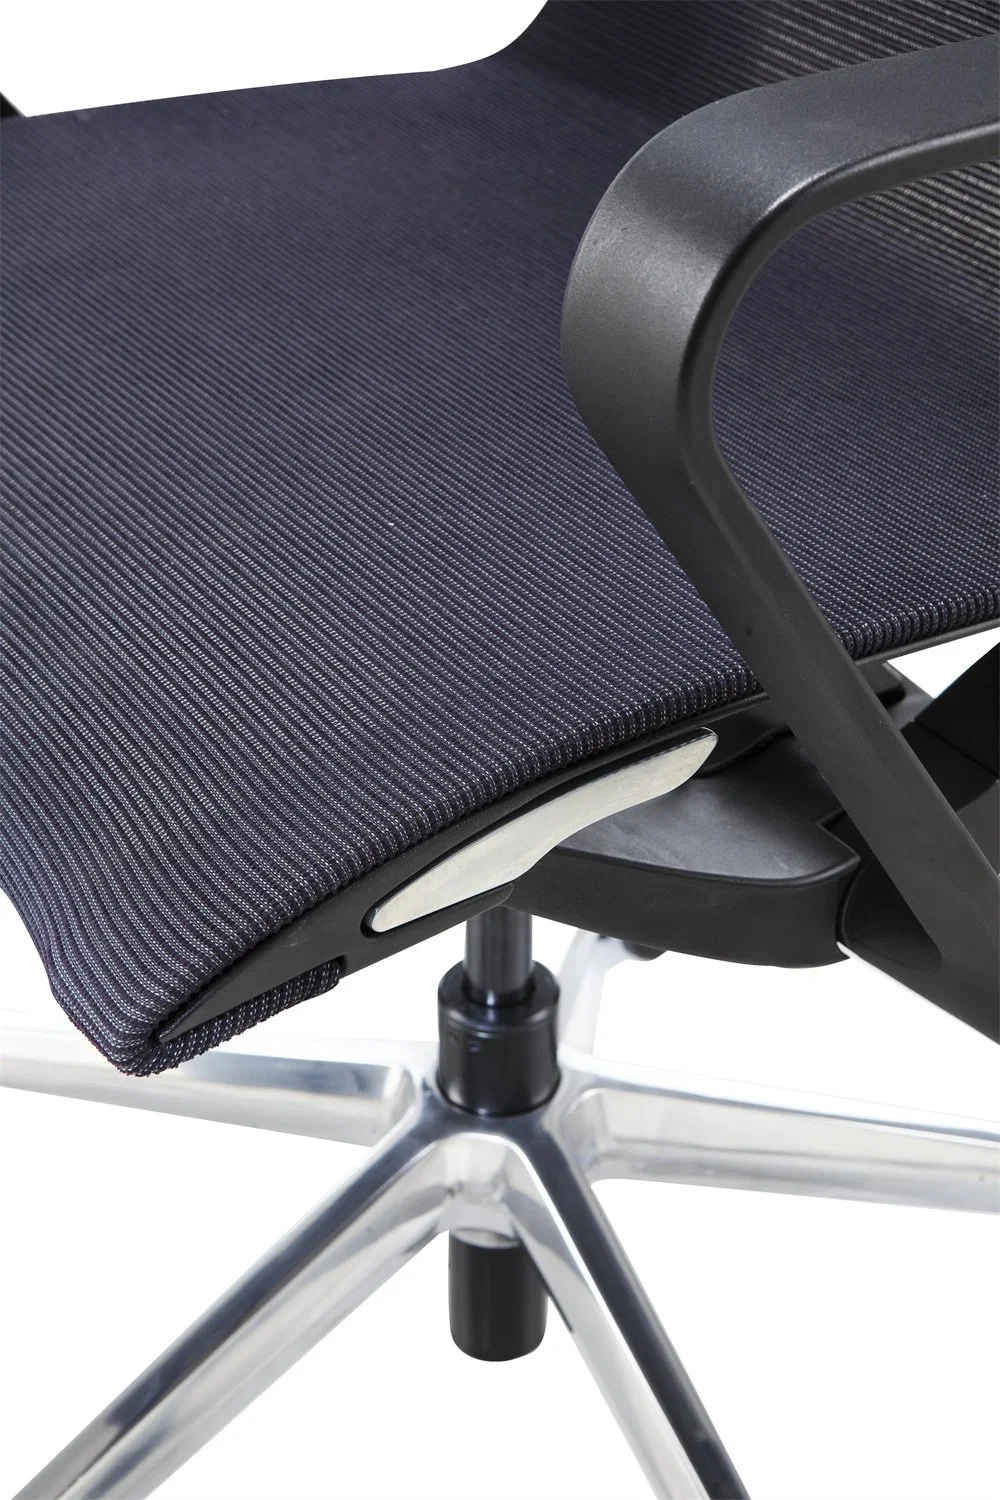 Office Independent Fix Armrests Middle Back Aluminium Gaming Study Ergonomic Mesh Chair